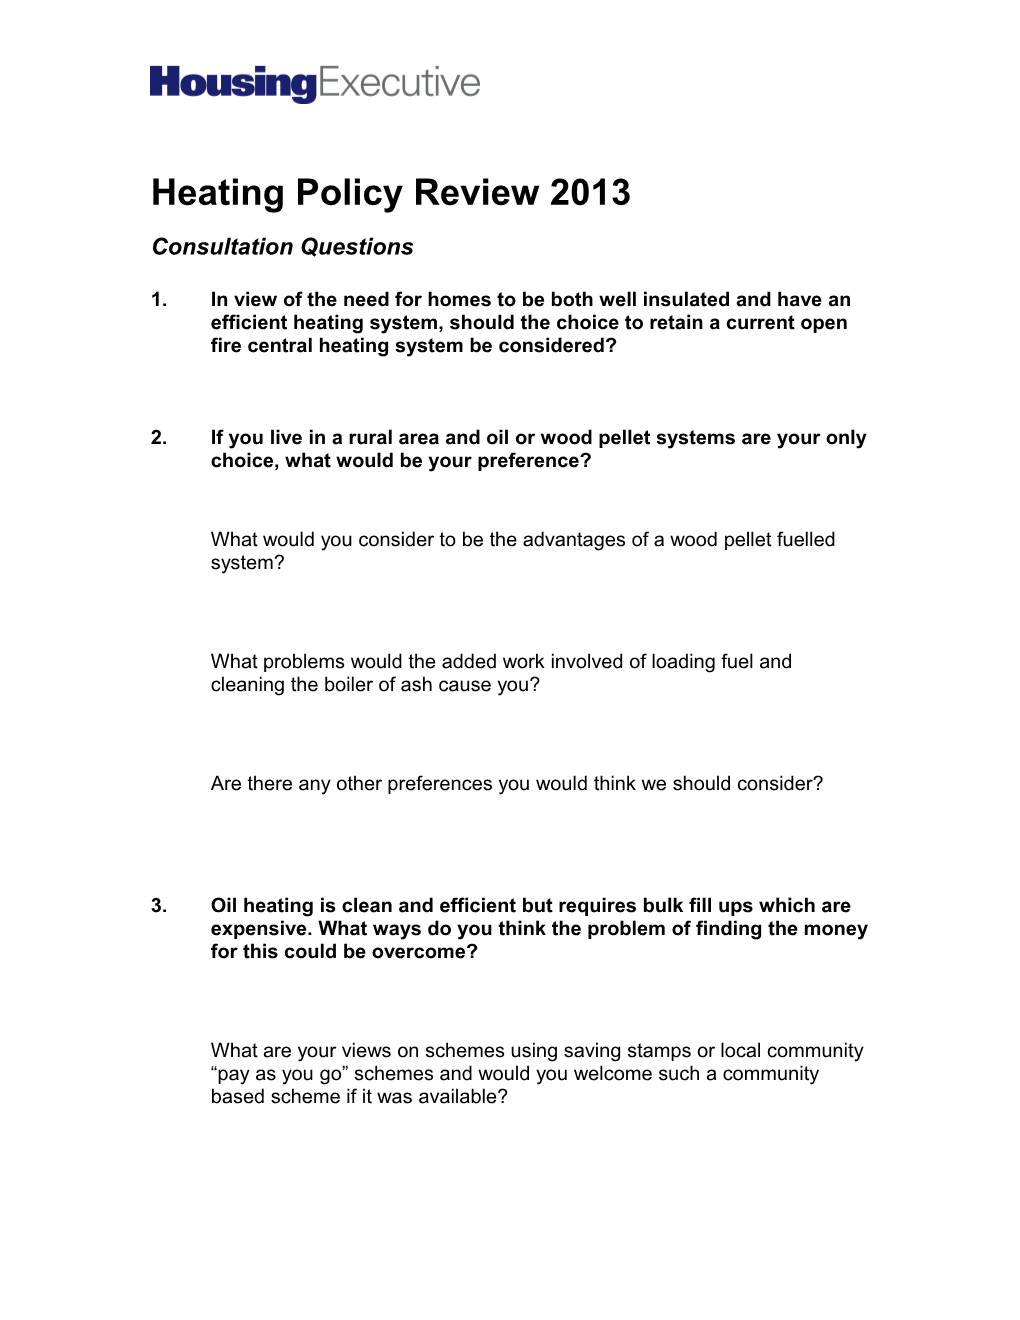 Heating Policy Review Consultation Questions 2013